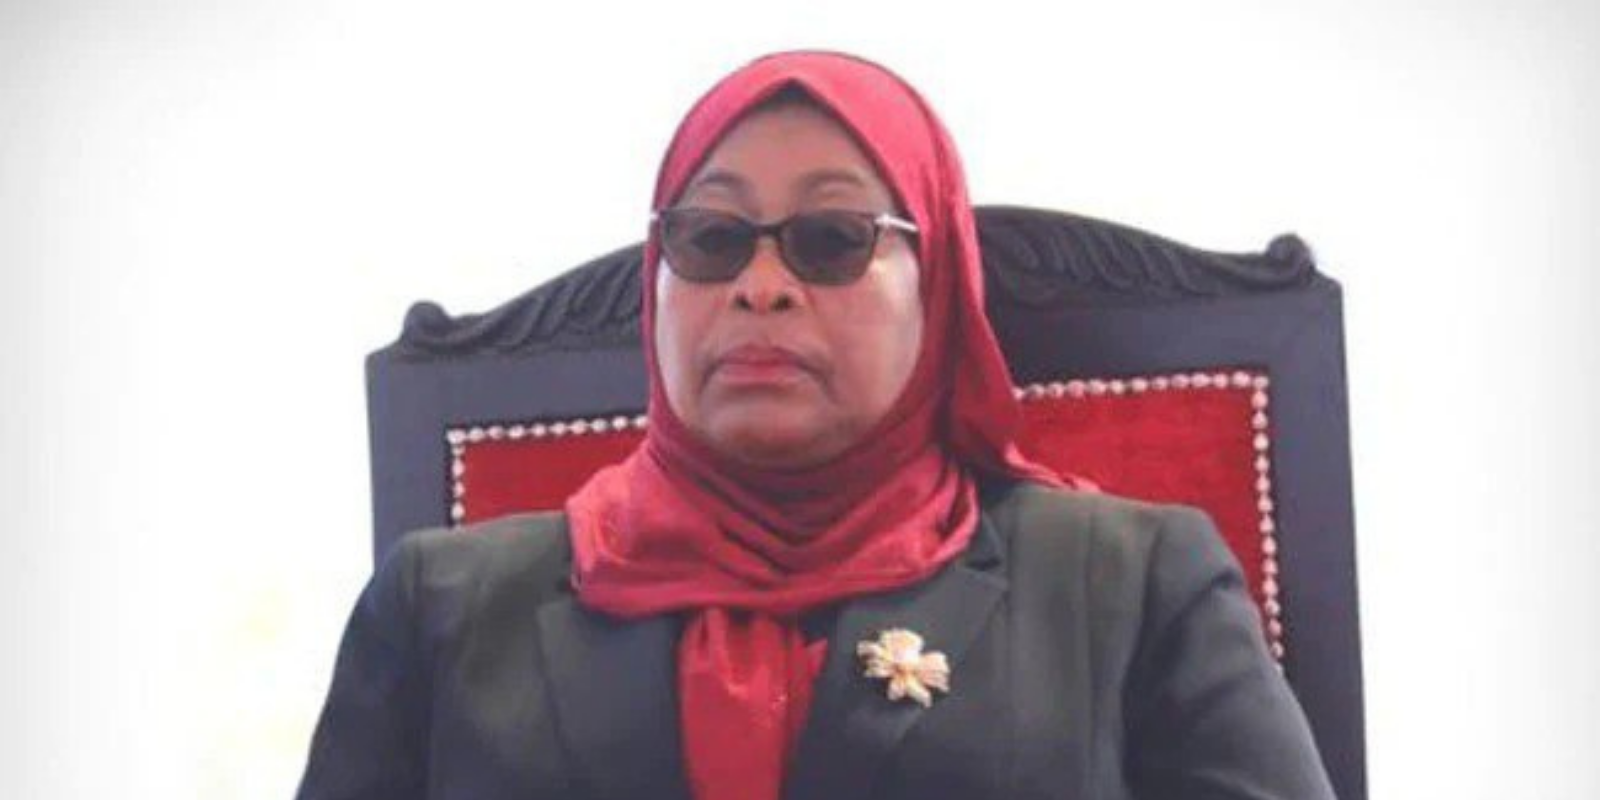 Samia Suluhu is the president of which country?